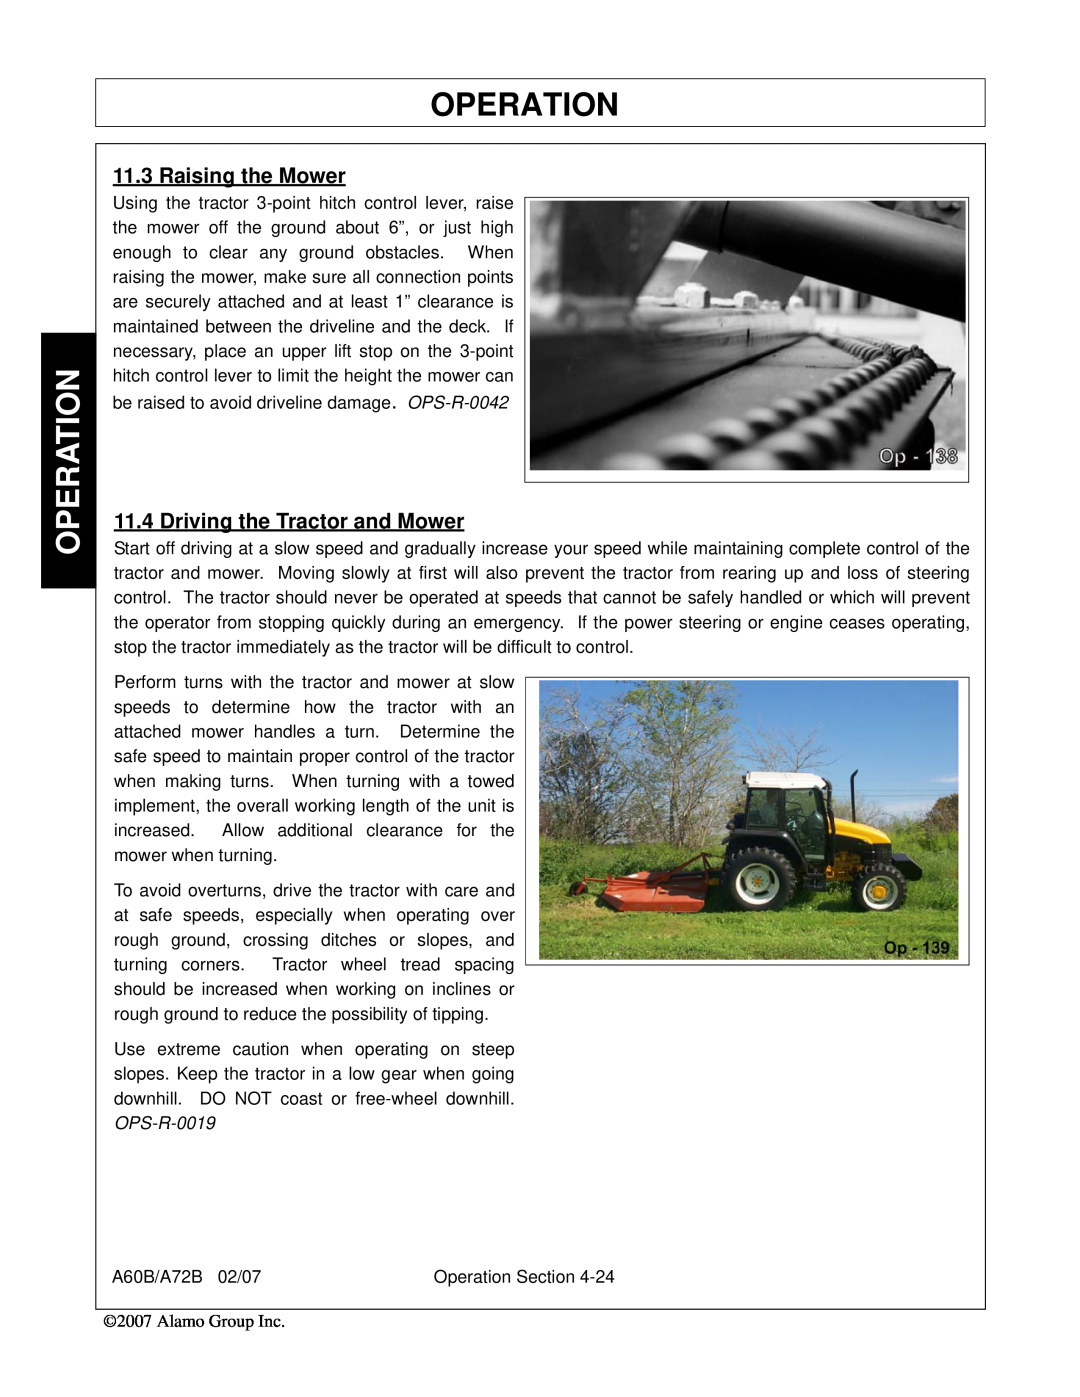 Alamo 00759354C, A60B, A72B manual Raising the Mower, Driving the Tractor and Mower, Operation 